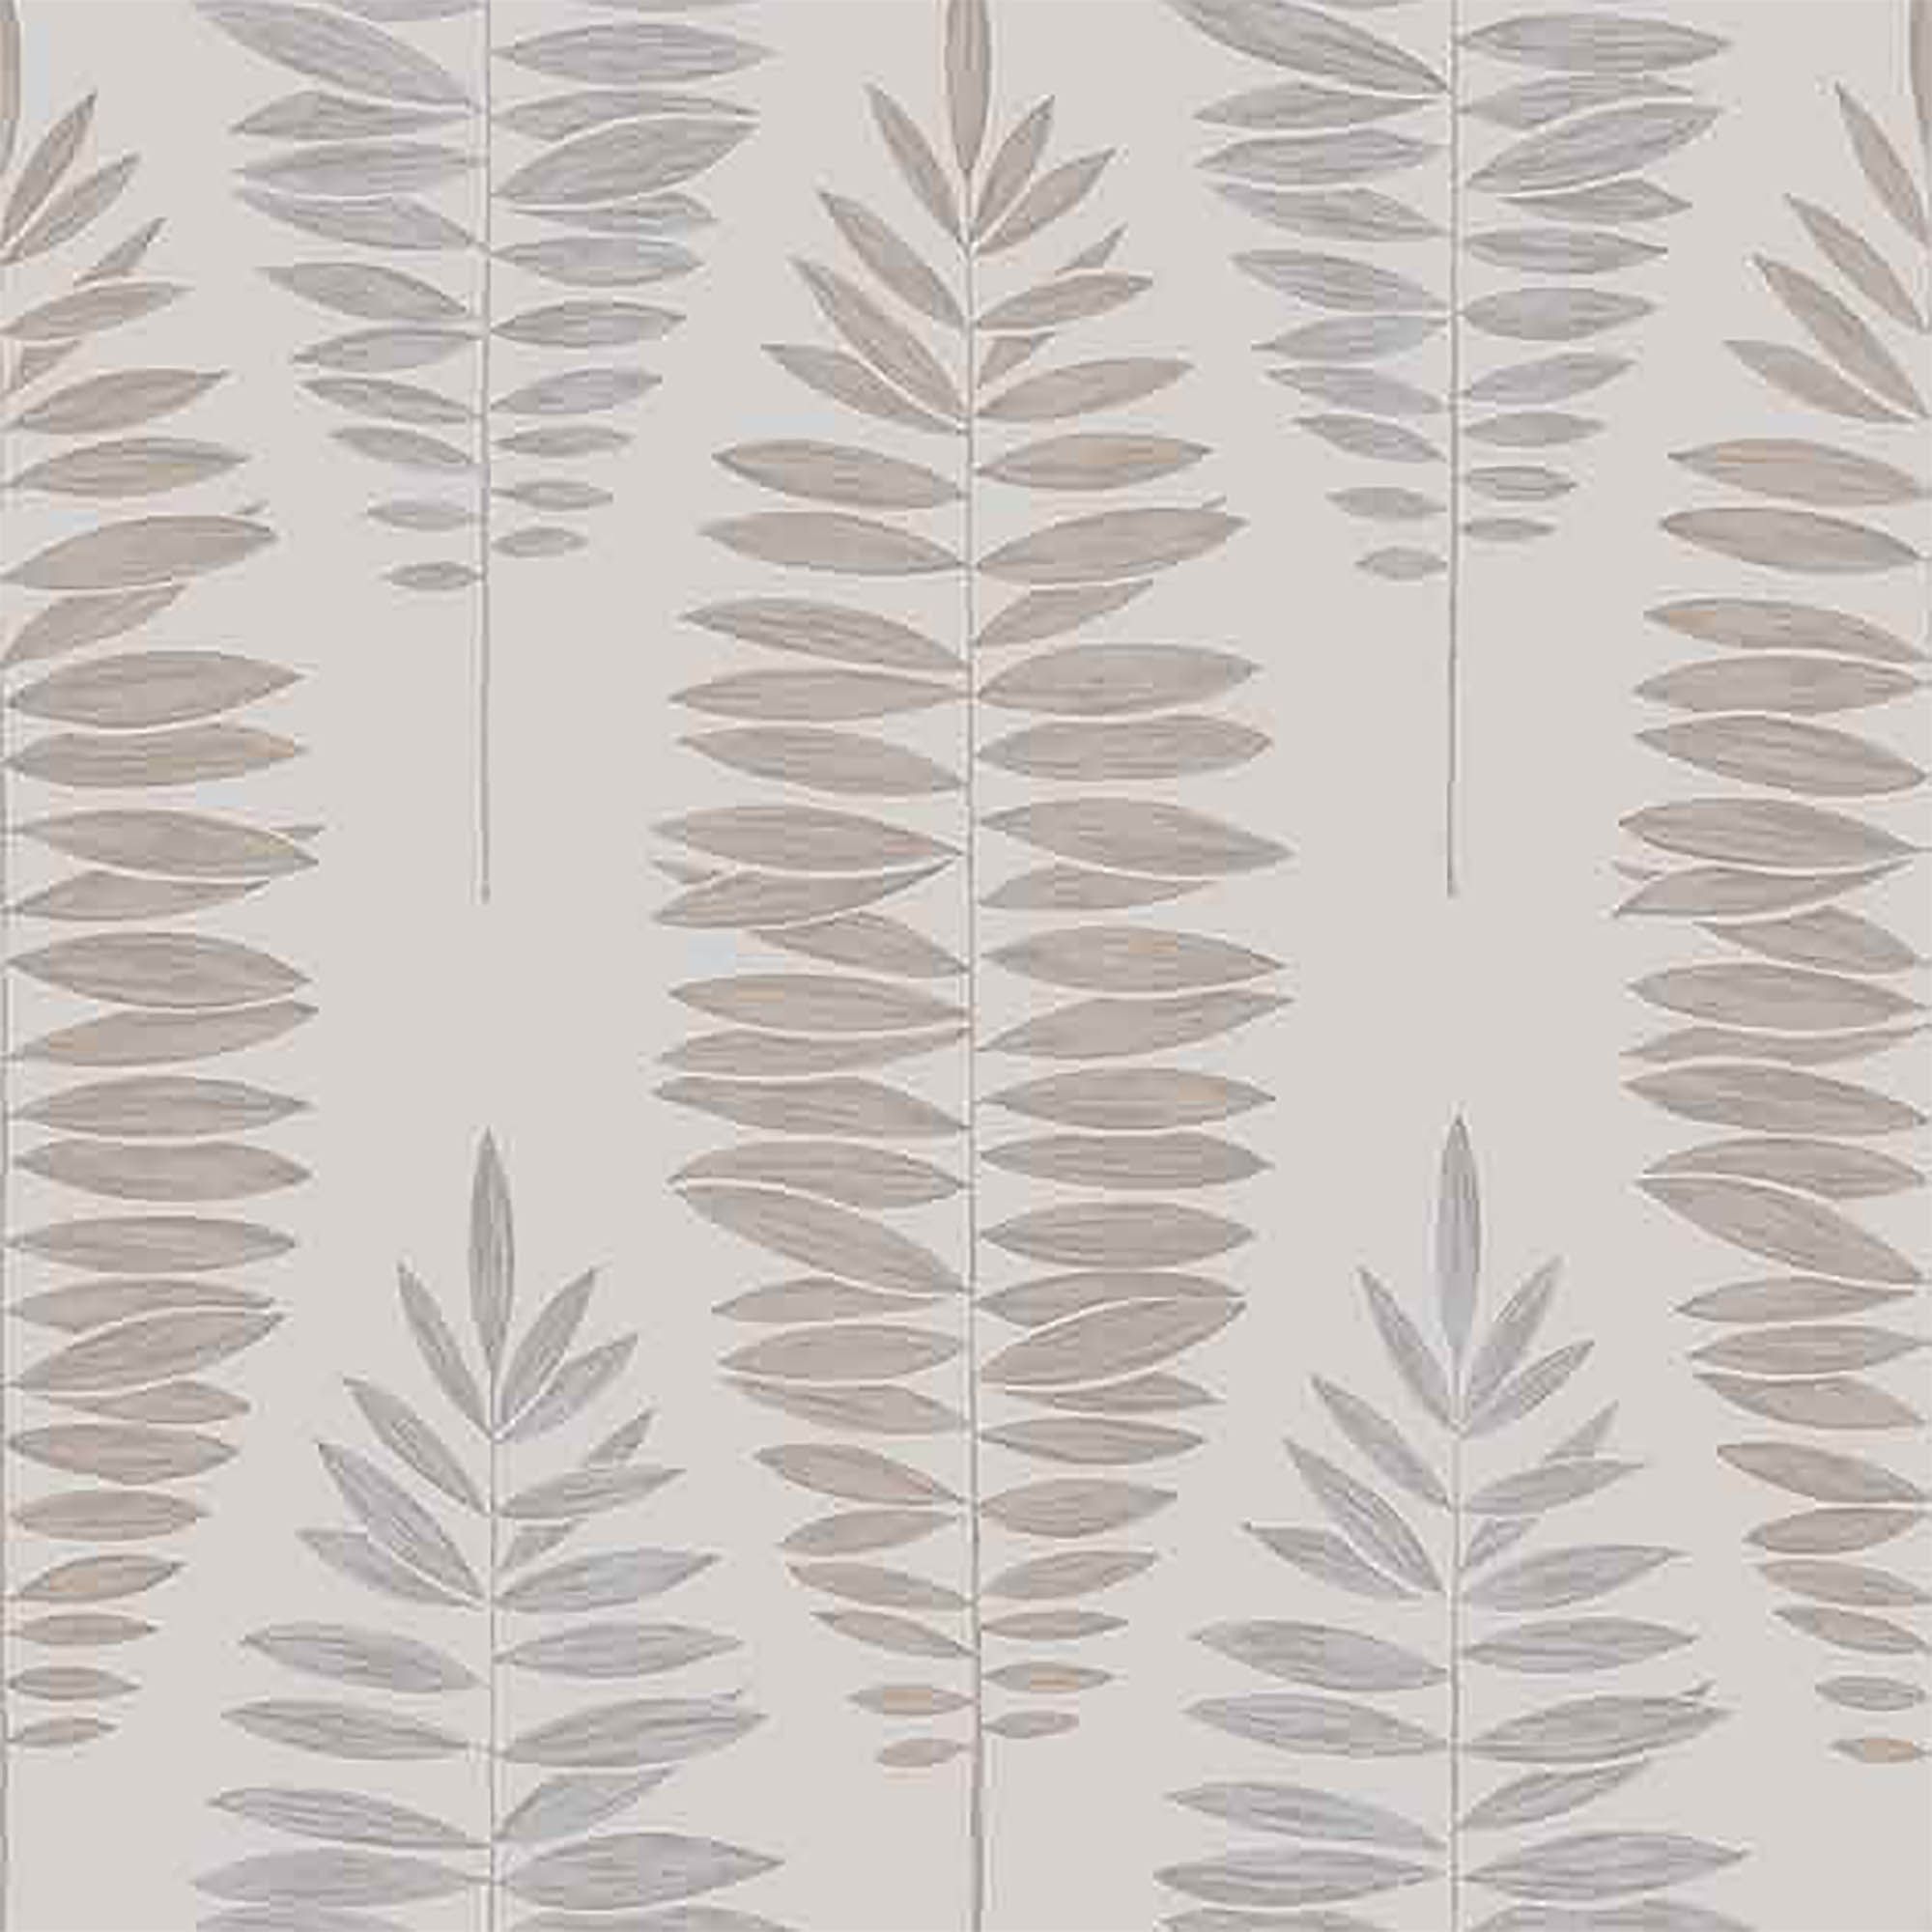 Boutique Lucia Beige Metallic effect Leaves Smooth Wallpaper